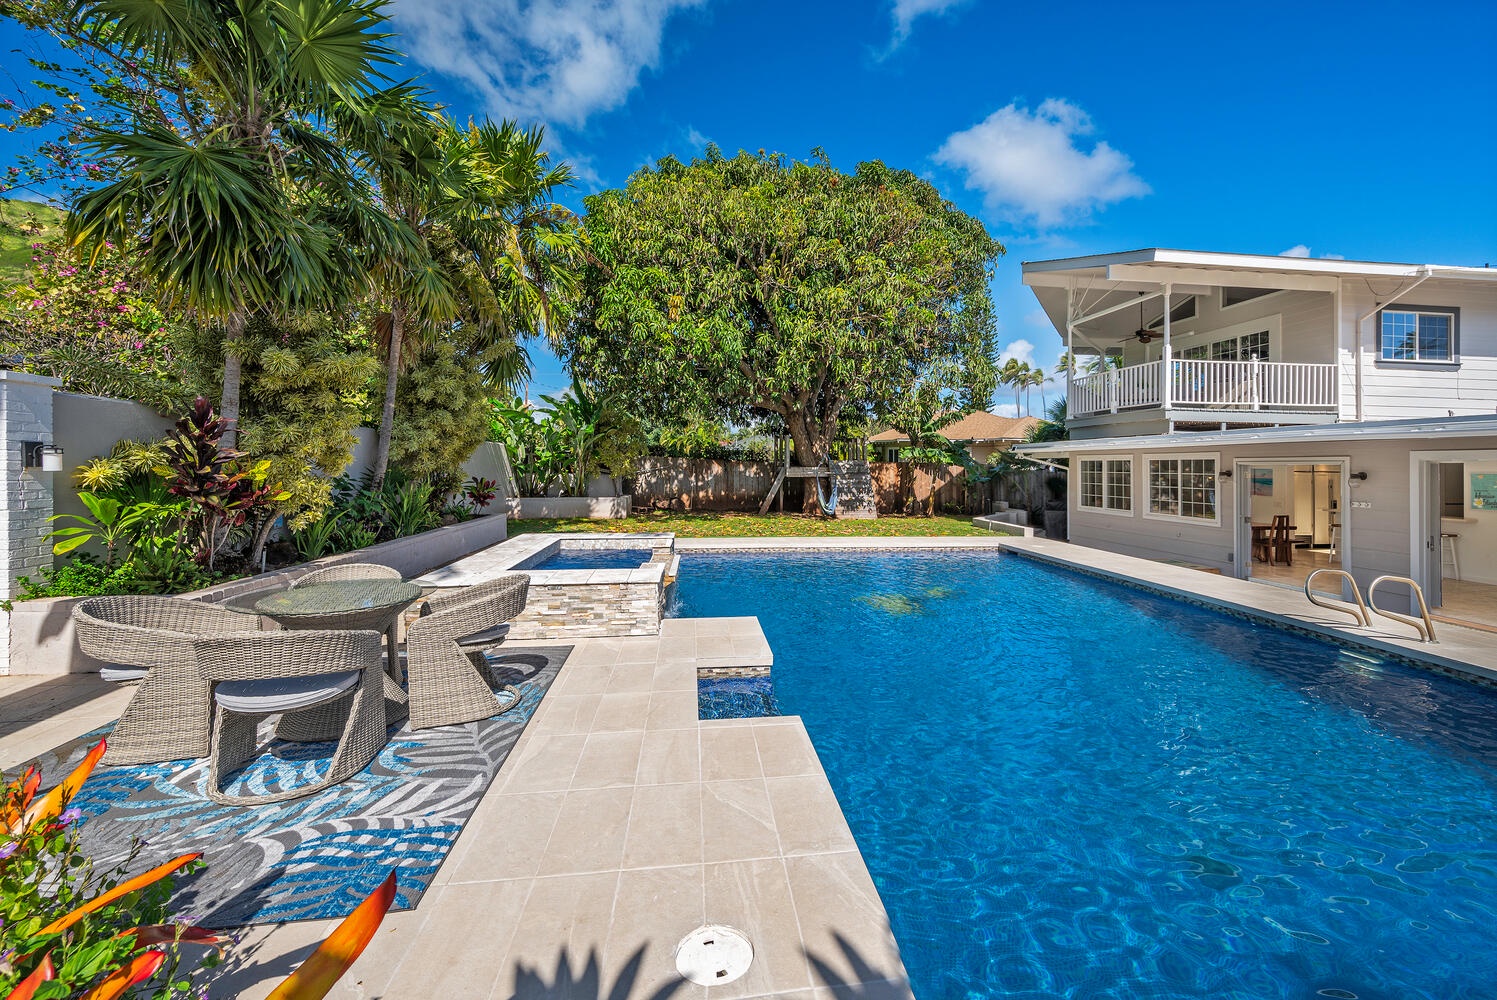 Kailua Vacation Rentals, Villa Hui Hou - Lush backyard with large pool deck and pool give you all the feels of having your own private mini hotel!  (Note: Upper pool area is apart of the pool and NOT a spa)